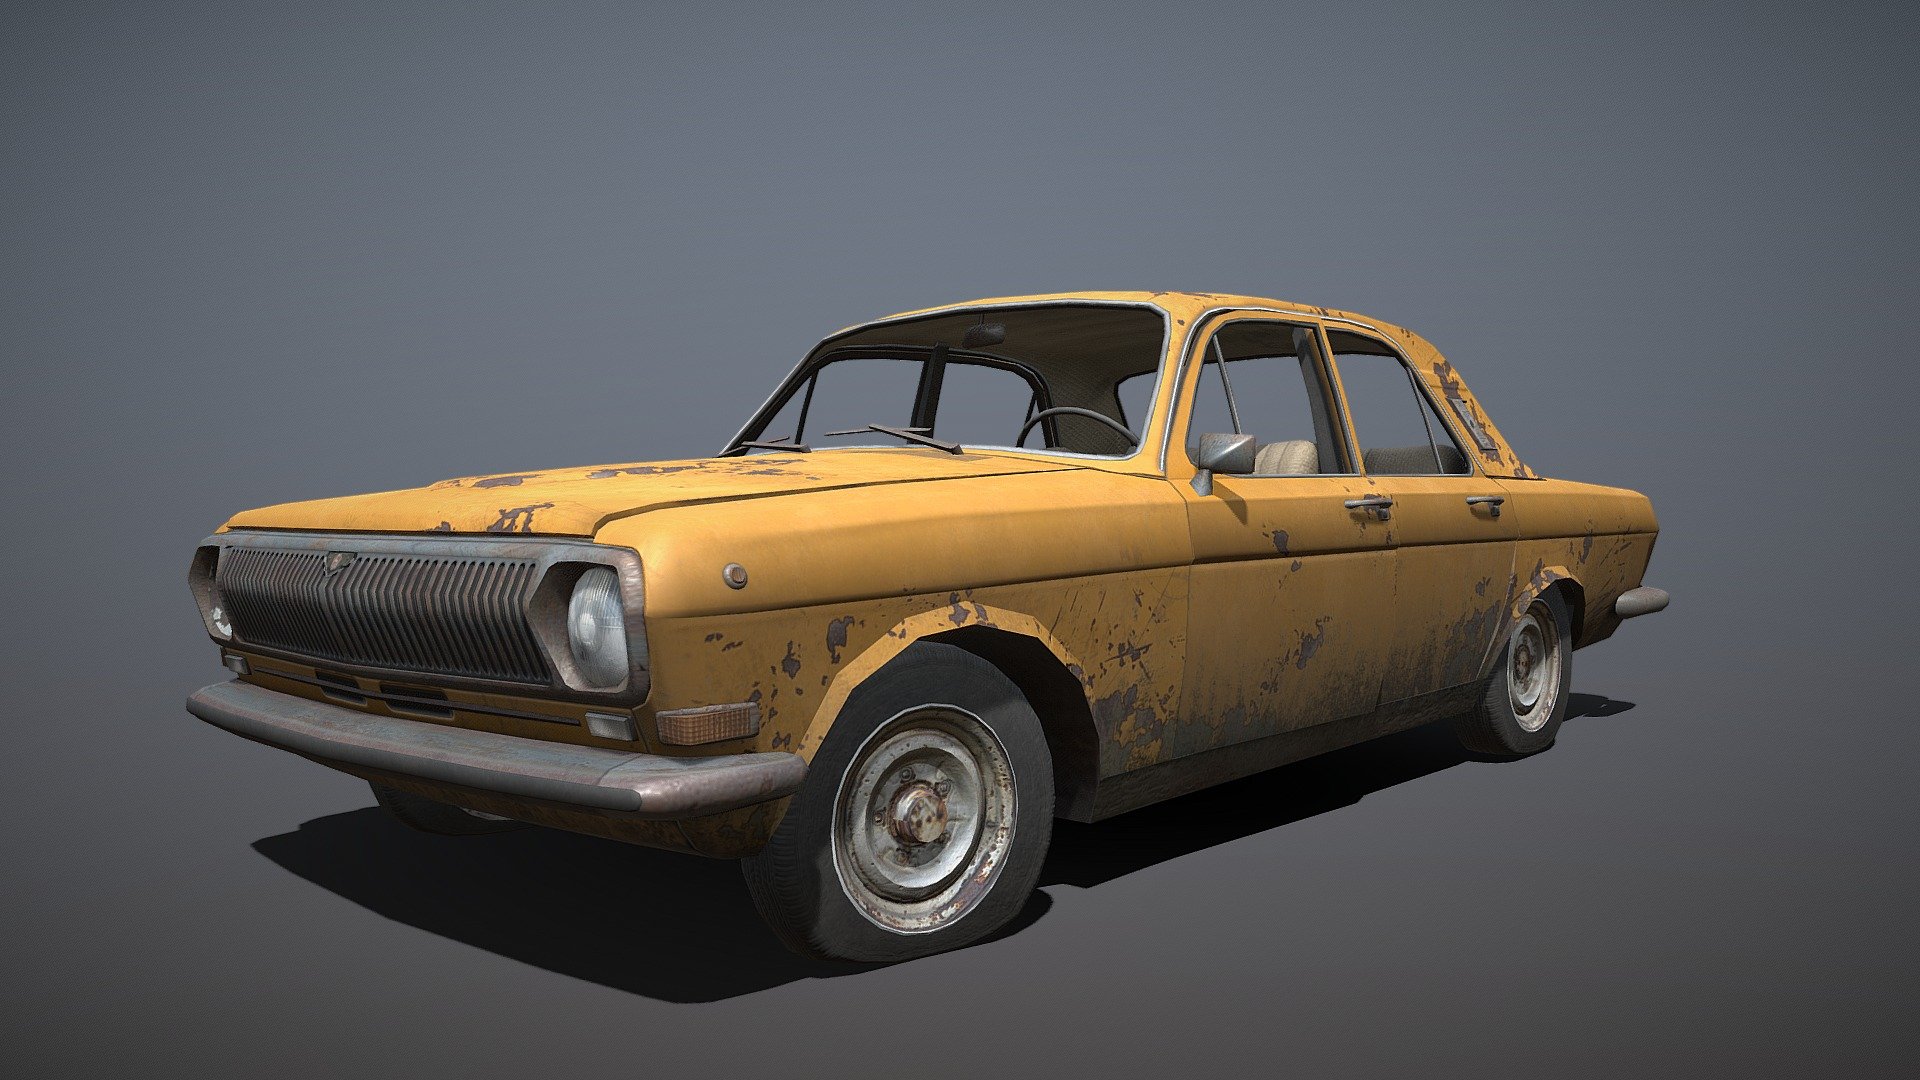 A low poly game-ready volga prop. The Volga manufactured by Gorkovsky Avtomobilny Zavod, it was designed in 1970 and production continued with very minimal changes to the blueprint until 1992. This asset is ready with normals/pbr to be placed in a game environment as detail 3d model